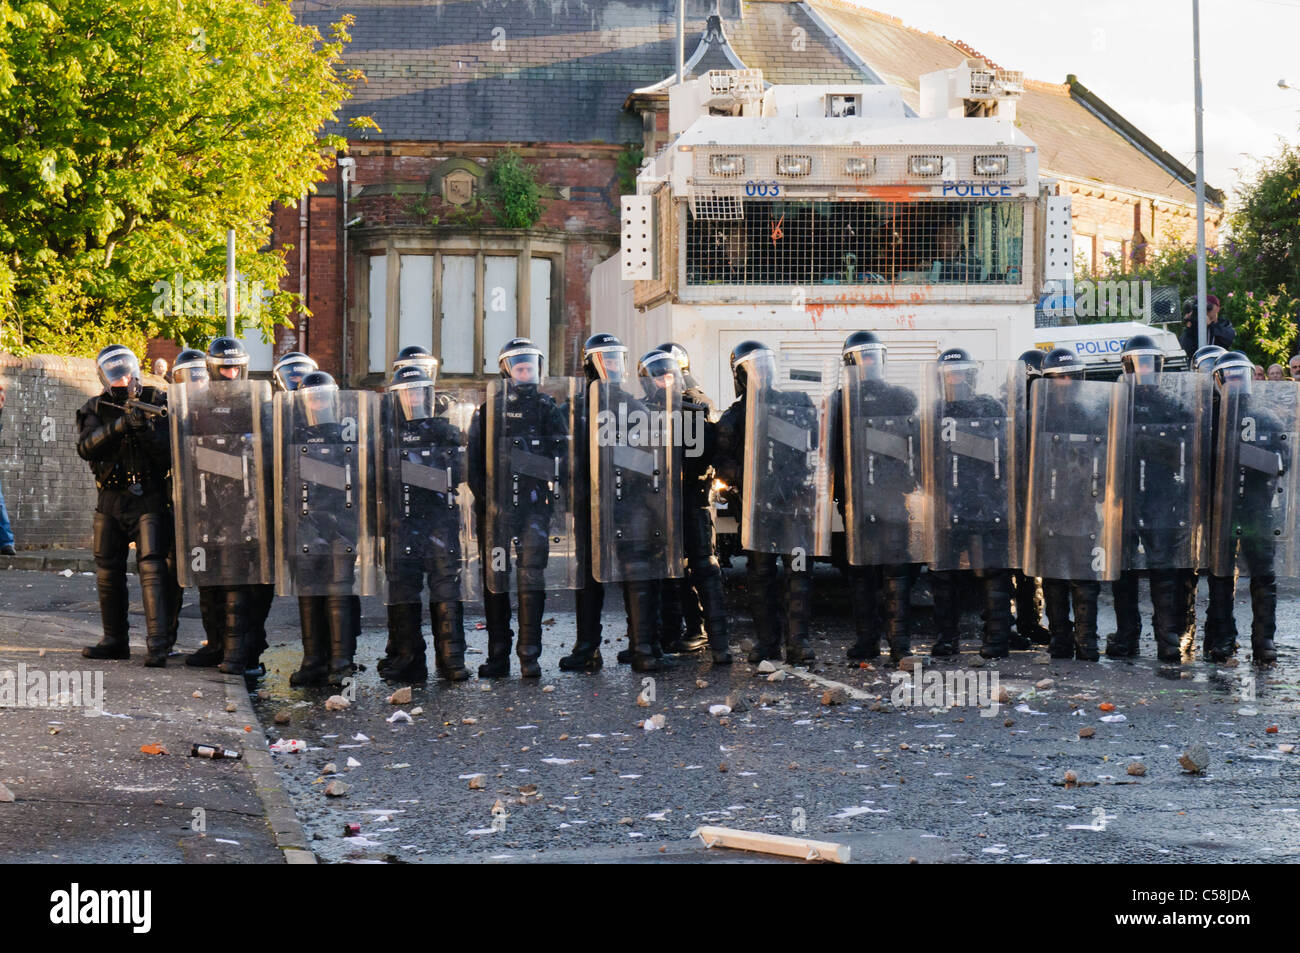 Police officers in riot gear with water cannon Stock Photo